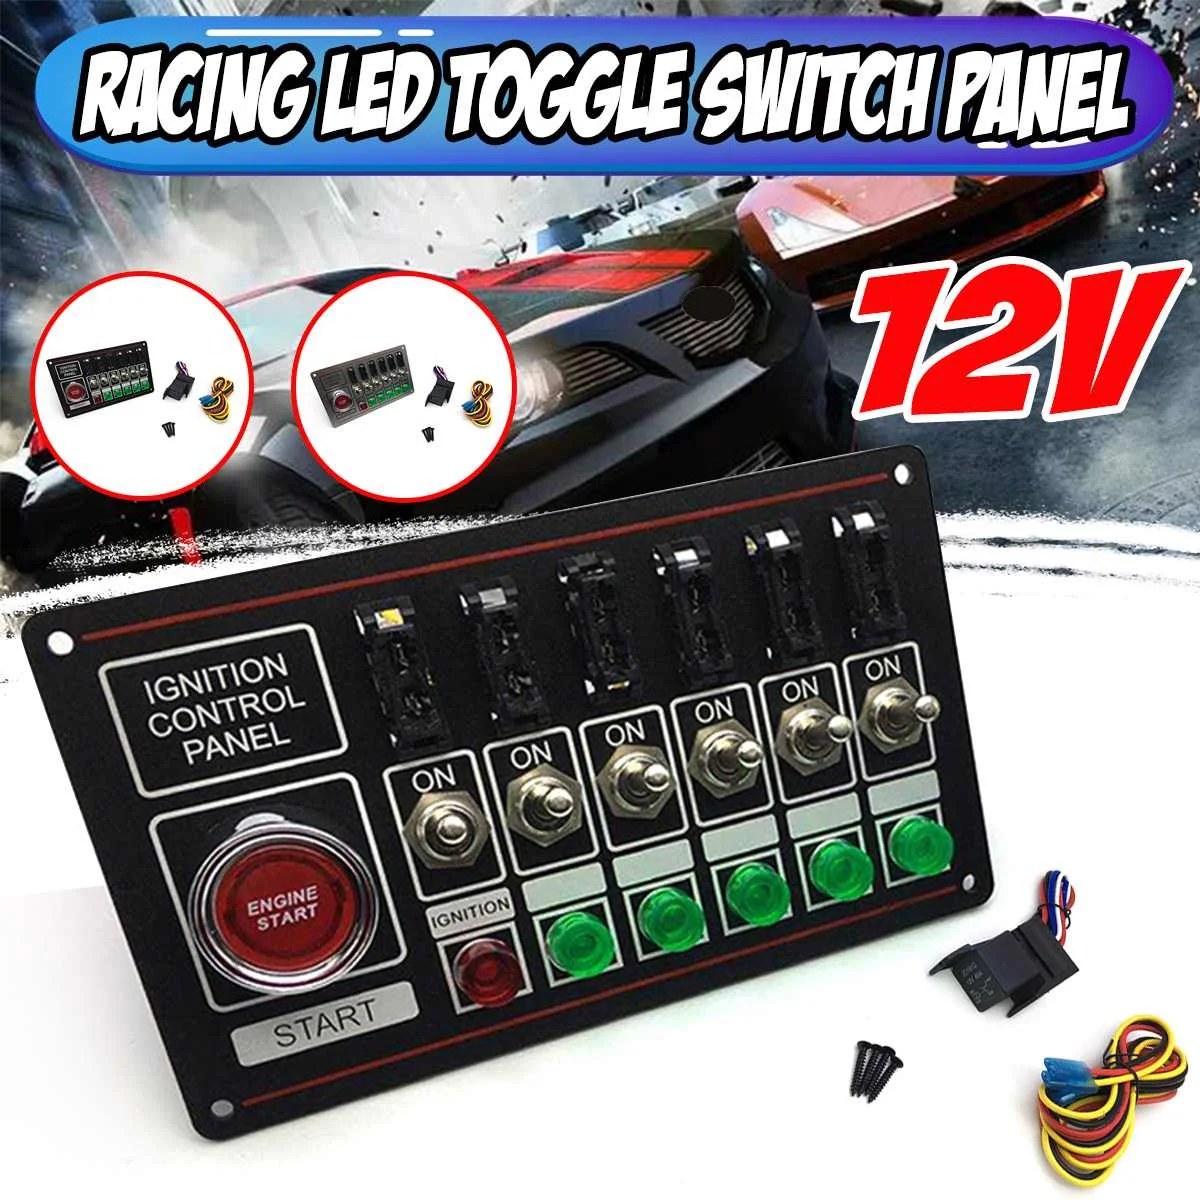 

12V Racing Car Rocker Push Switch Panel 6 Toggle Quick Off Switch Ignition Engine Start Button Fused Switch with Indicator Light